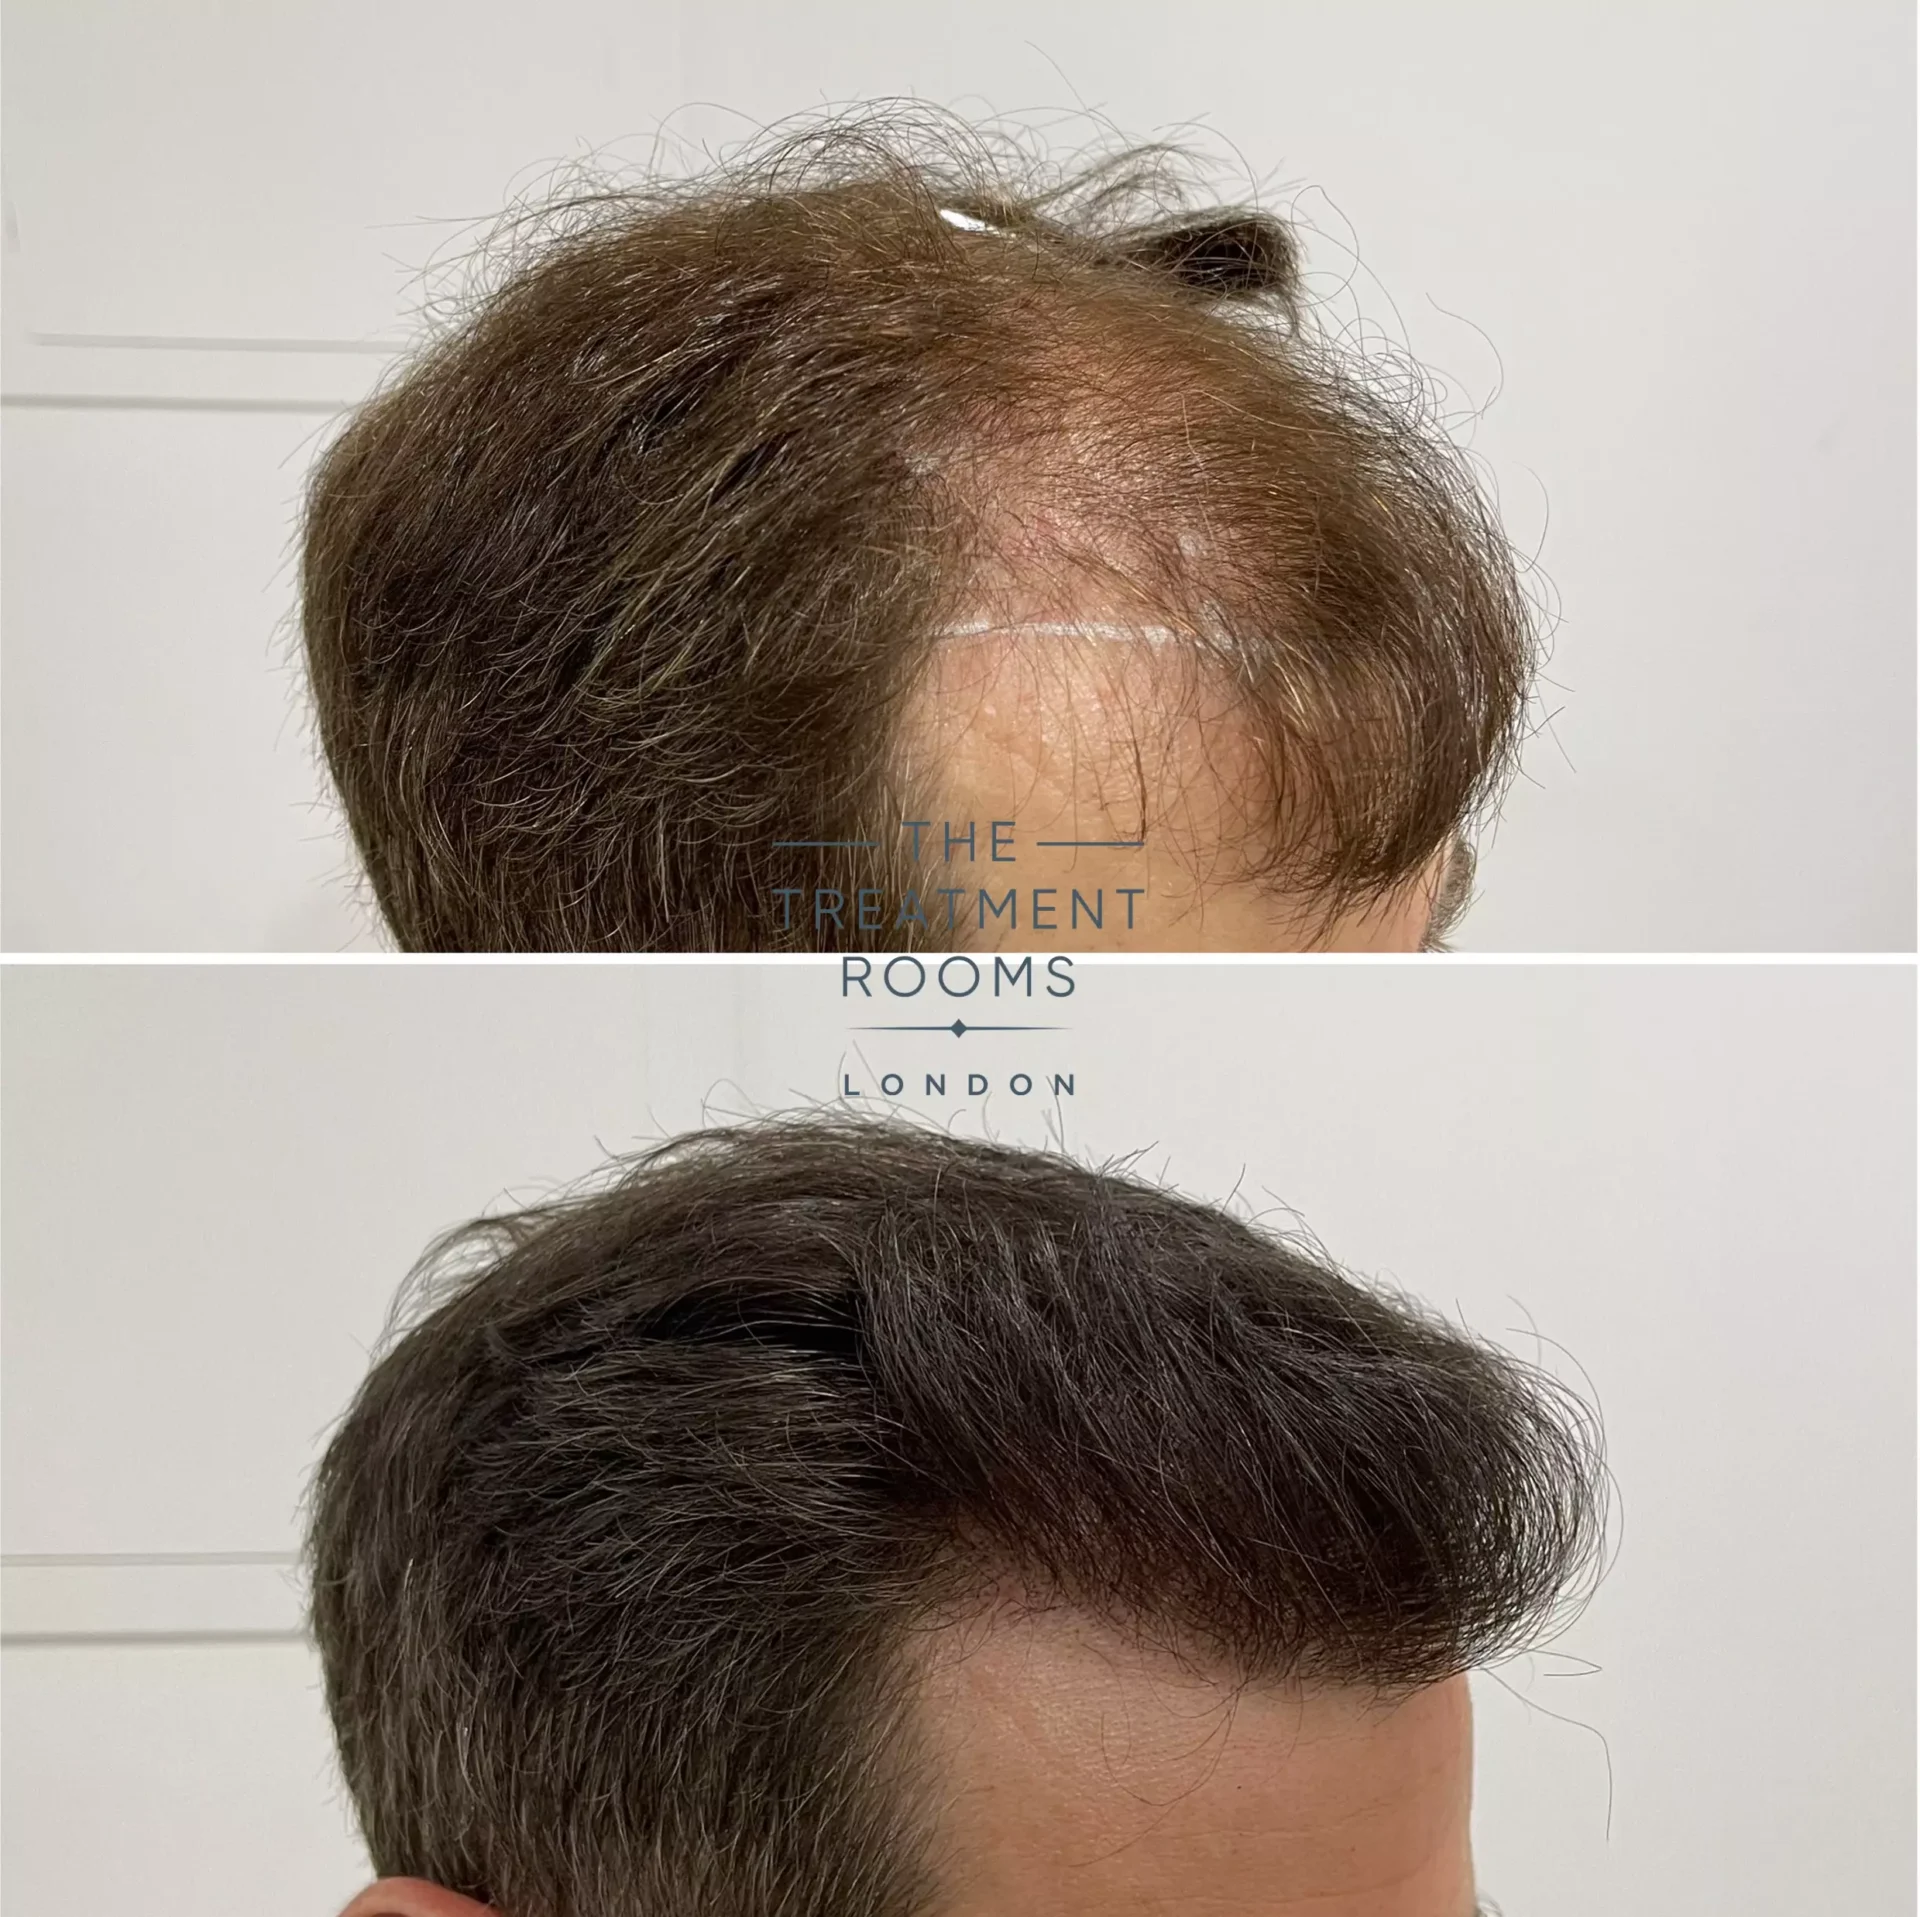 london hair transplant clinic before and after 1491 grafts